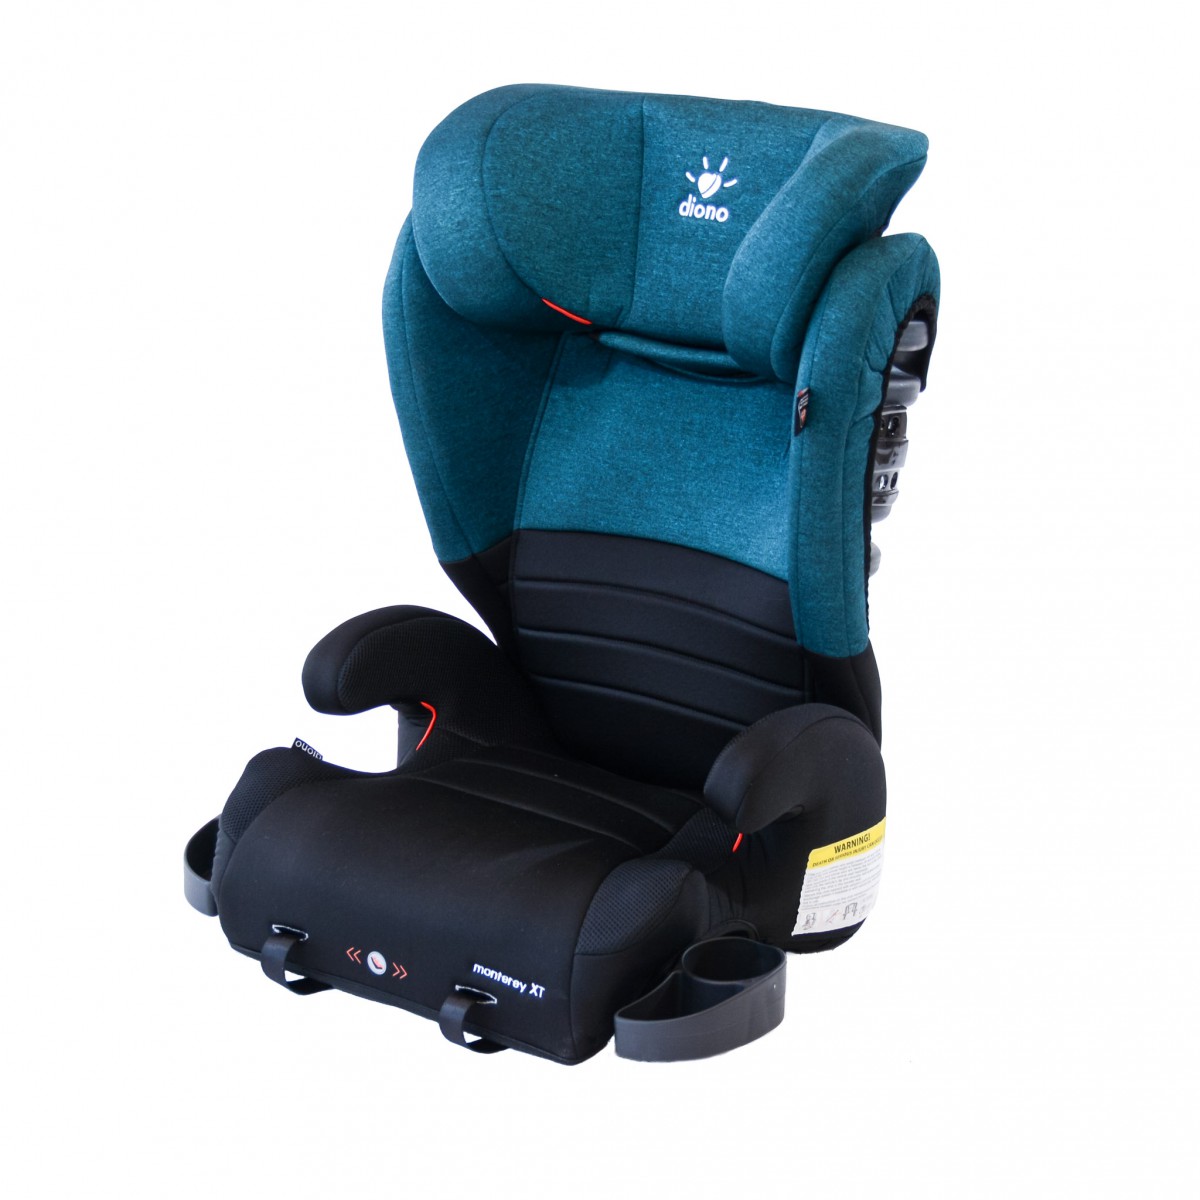 diono monterey xt booster seat review